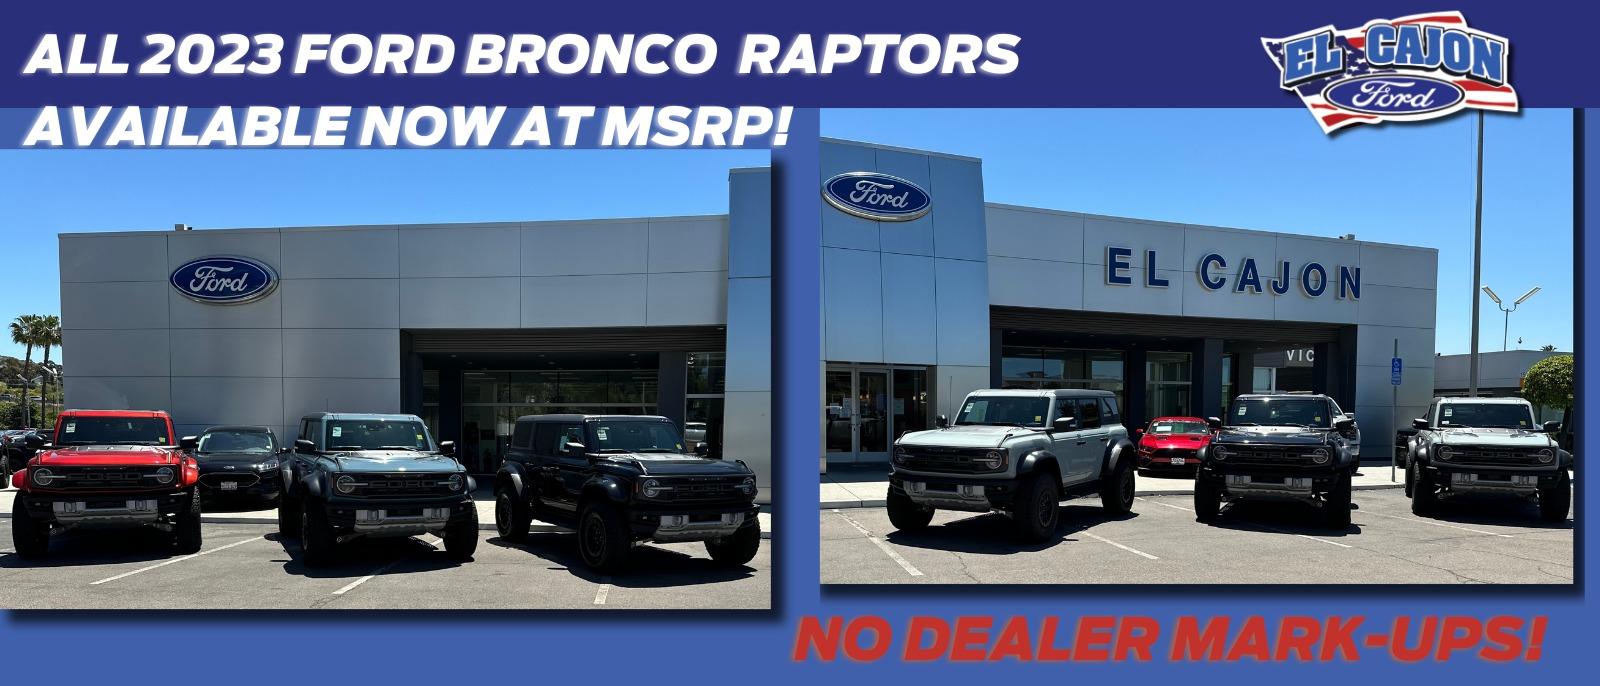 ALL 2023 FORD BRONCO RAPTORS AVAILABLE NOW AT MSRP!